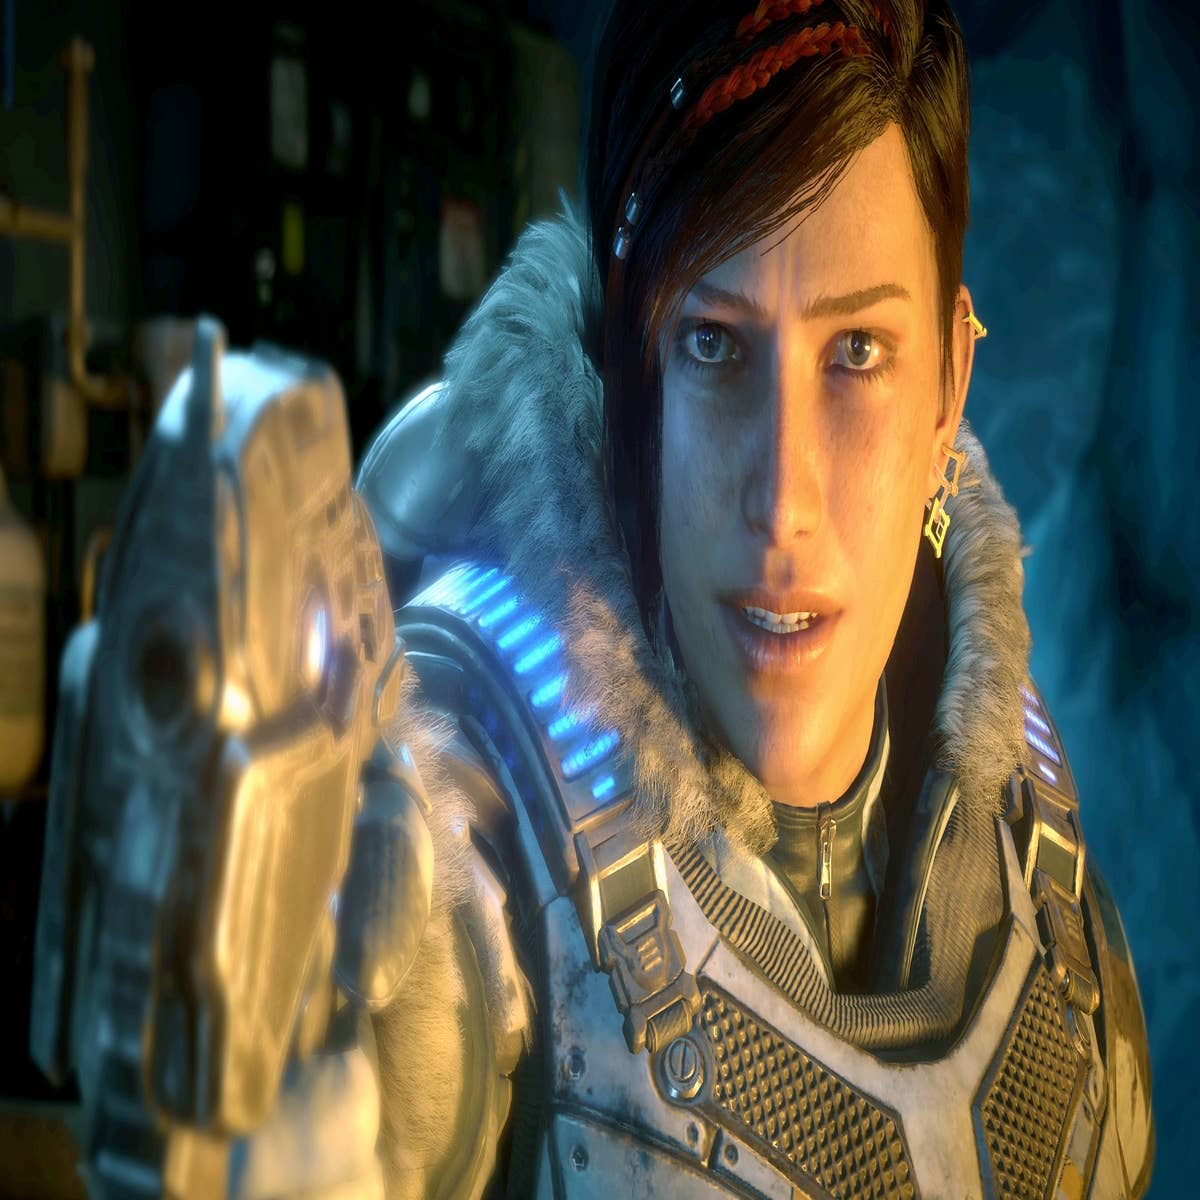 Gears 5 removes a mode, but gives players free Xbox Achievements